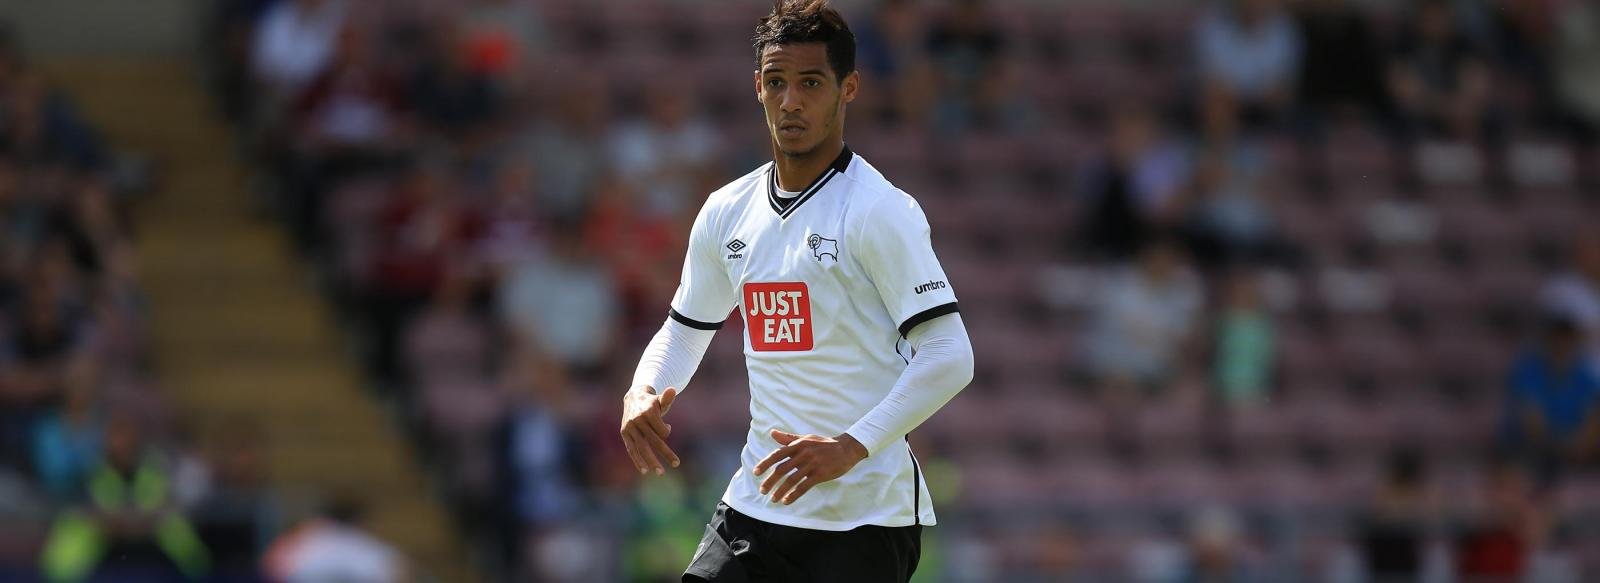 Tom Ince: The Force Re-awakens